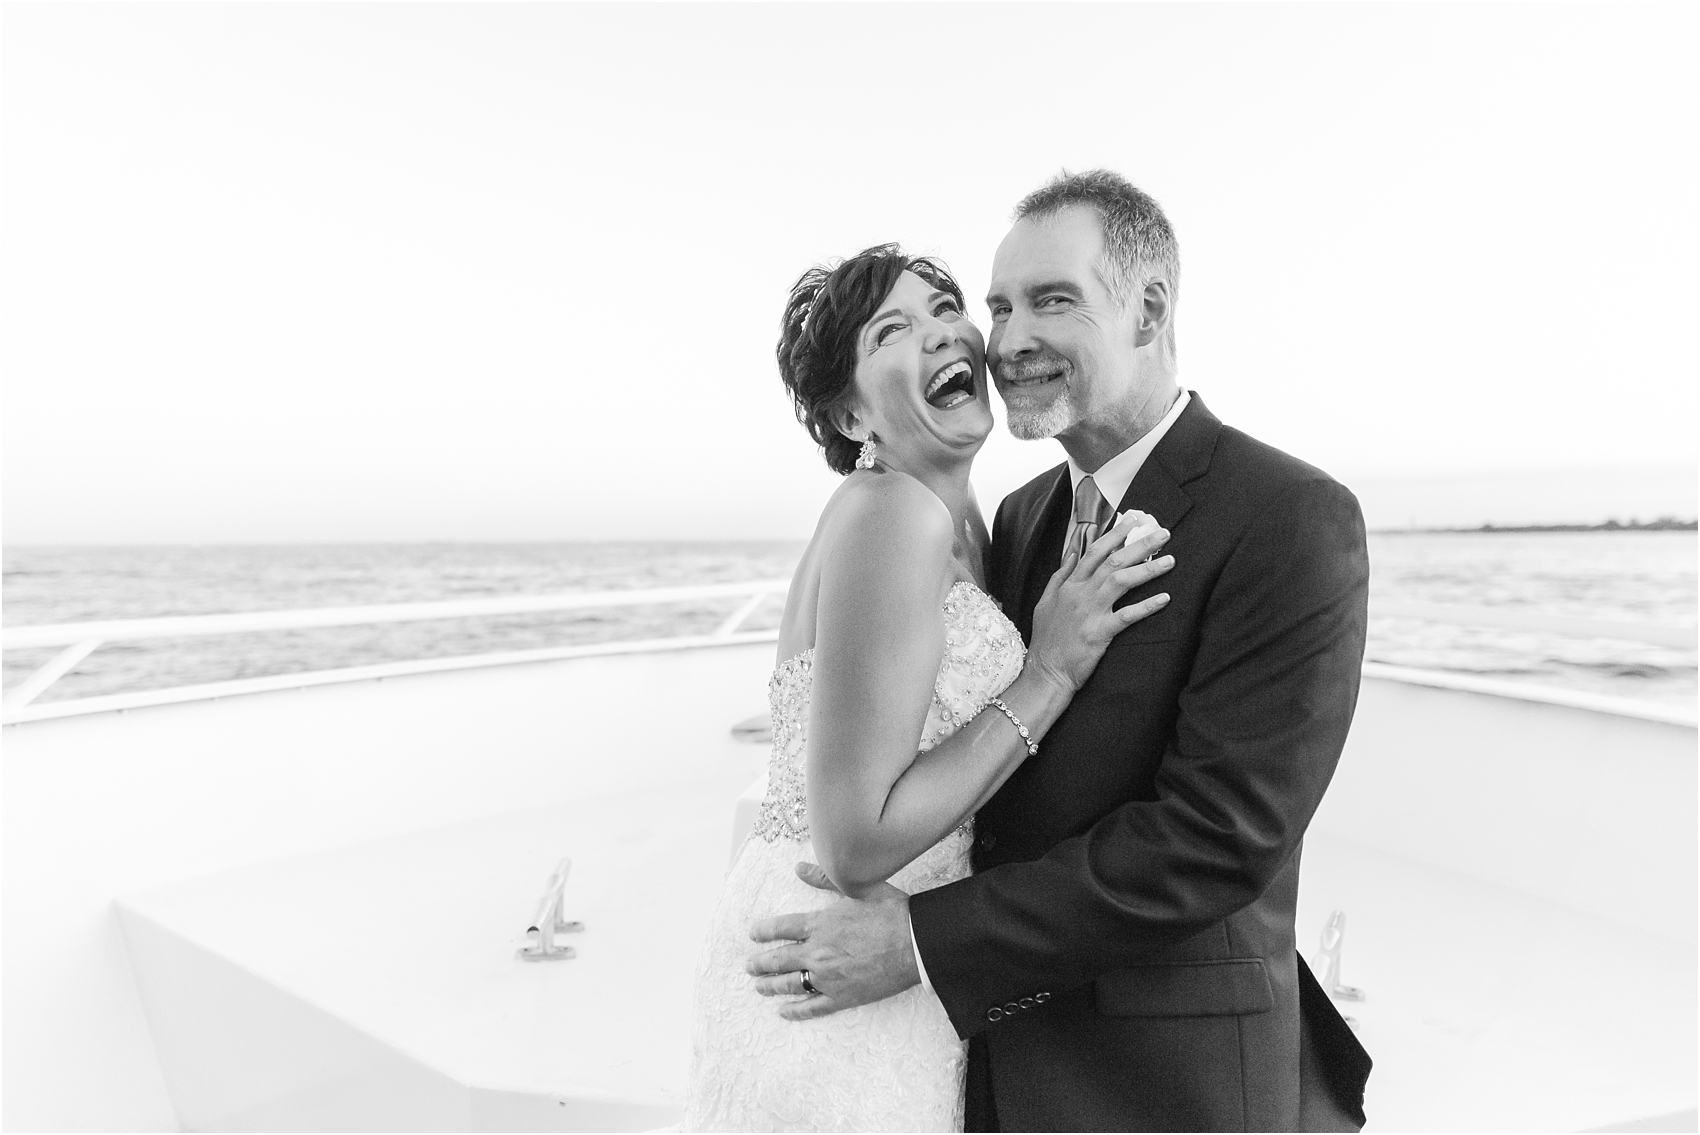 classic-natuical-inspired-wedding-photos-on-infinity-ovation-yacht-in-st-clair-shores-mi-by-courtney-carolyn-photography_0079.jpg